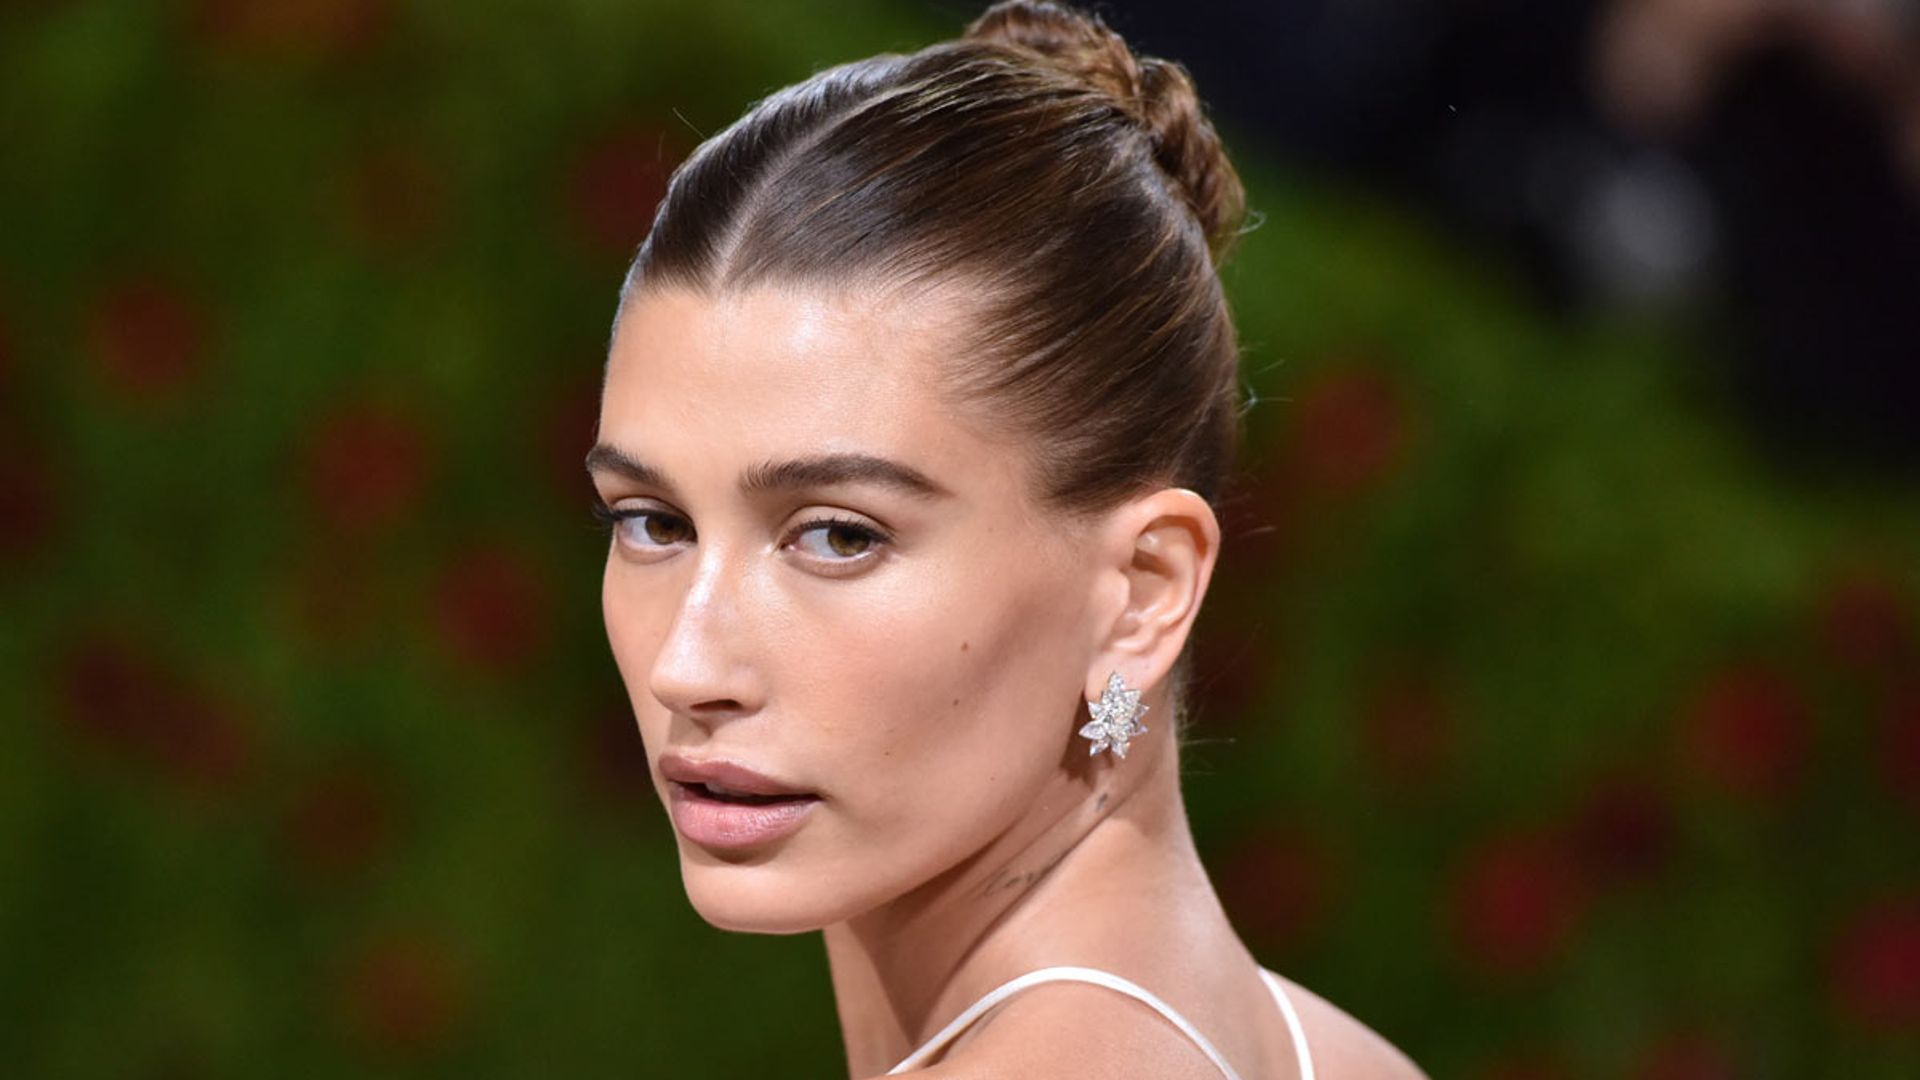 Hailey Bieber is a summer goddess as she plunges into pool in tiny bikini – watch